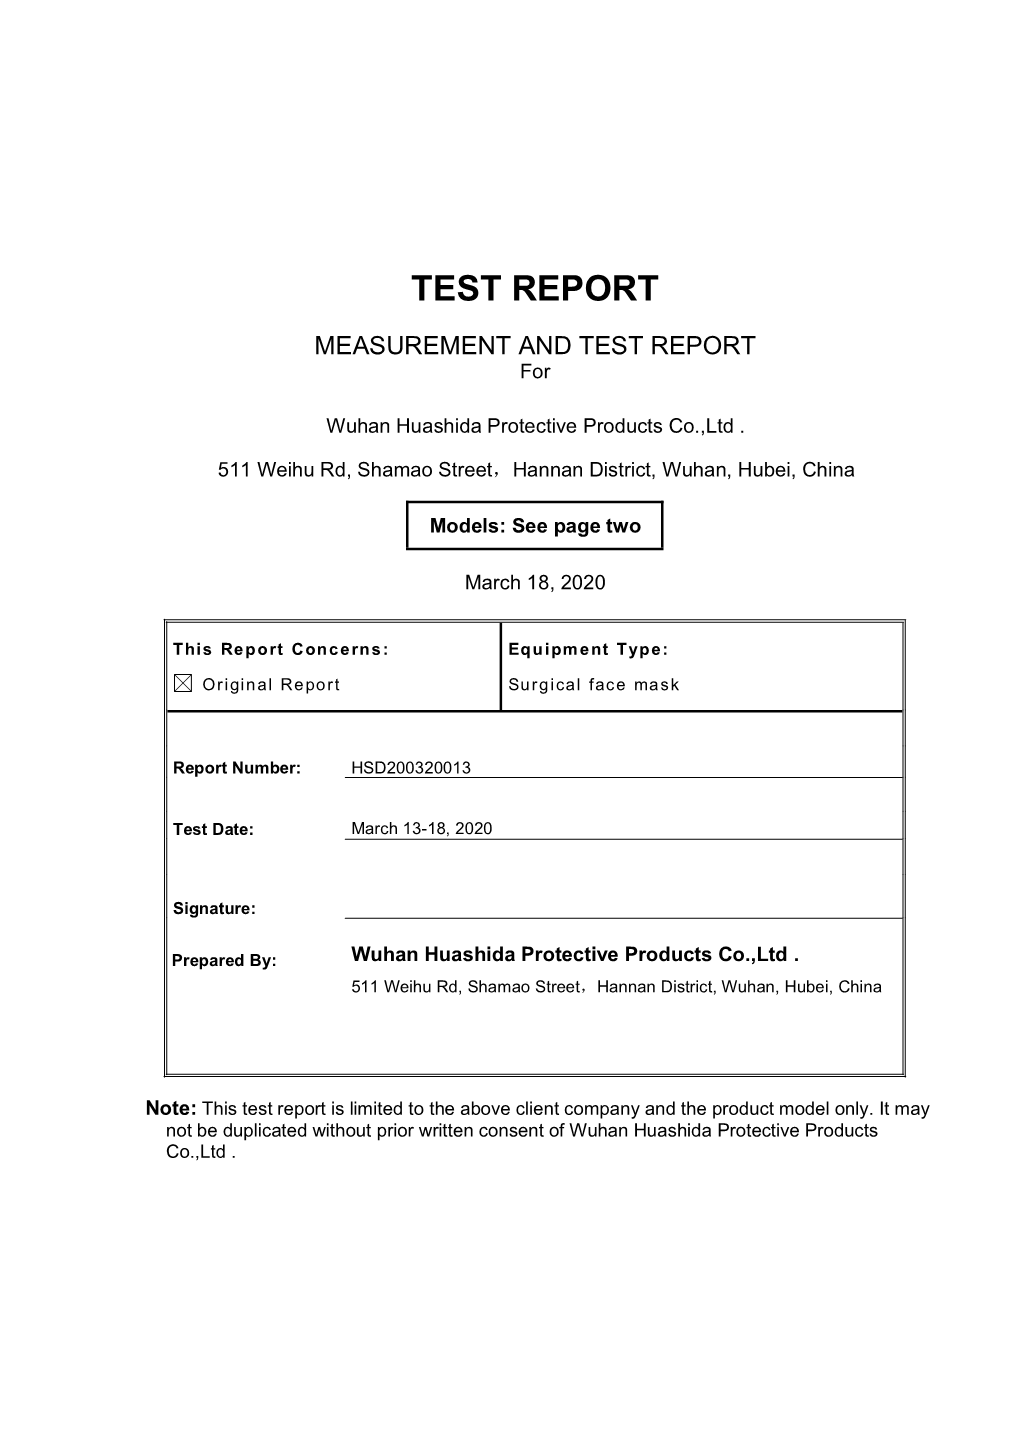 TEST REPORT MEASUREMENT and TEST REPORT For